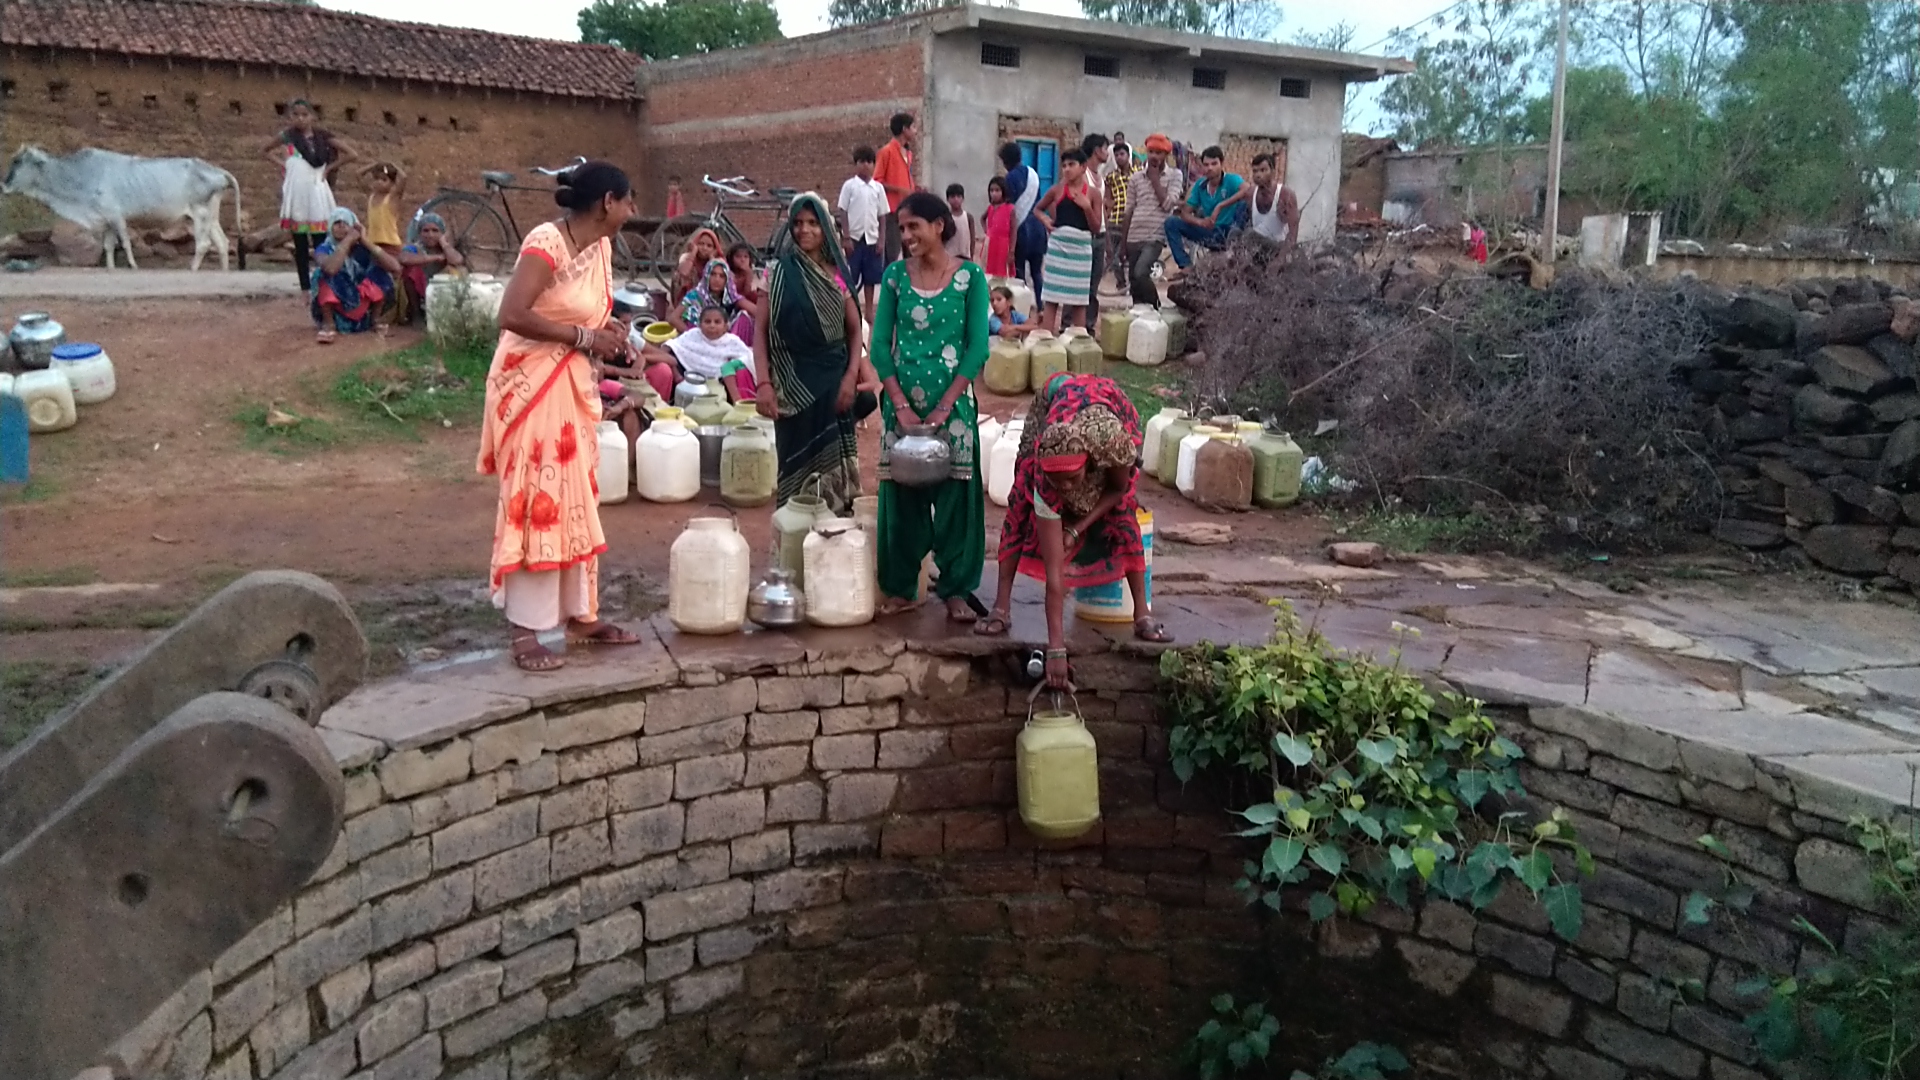 Piped water scheme opening into the worn-out traditional panchayat well in Nunagar, Panna (Image: Rohit Kumar)